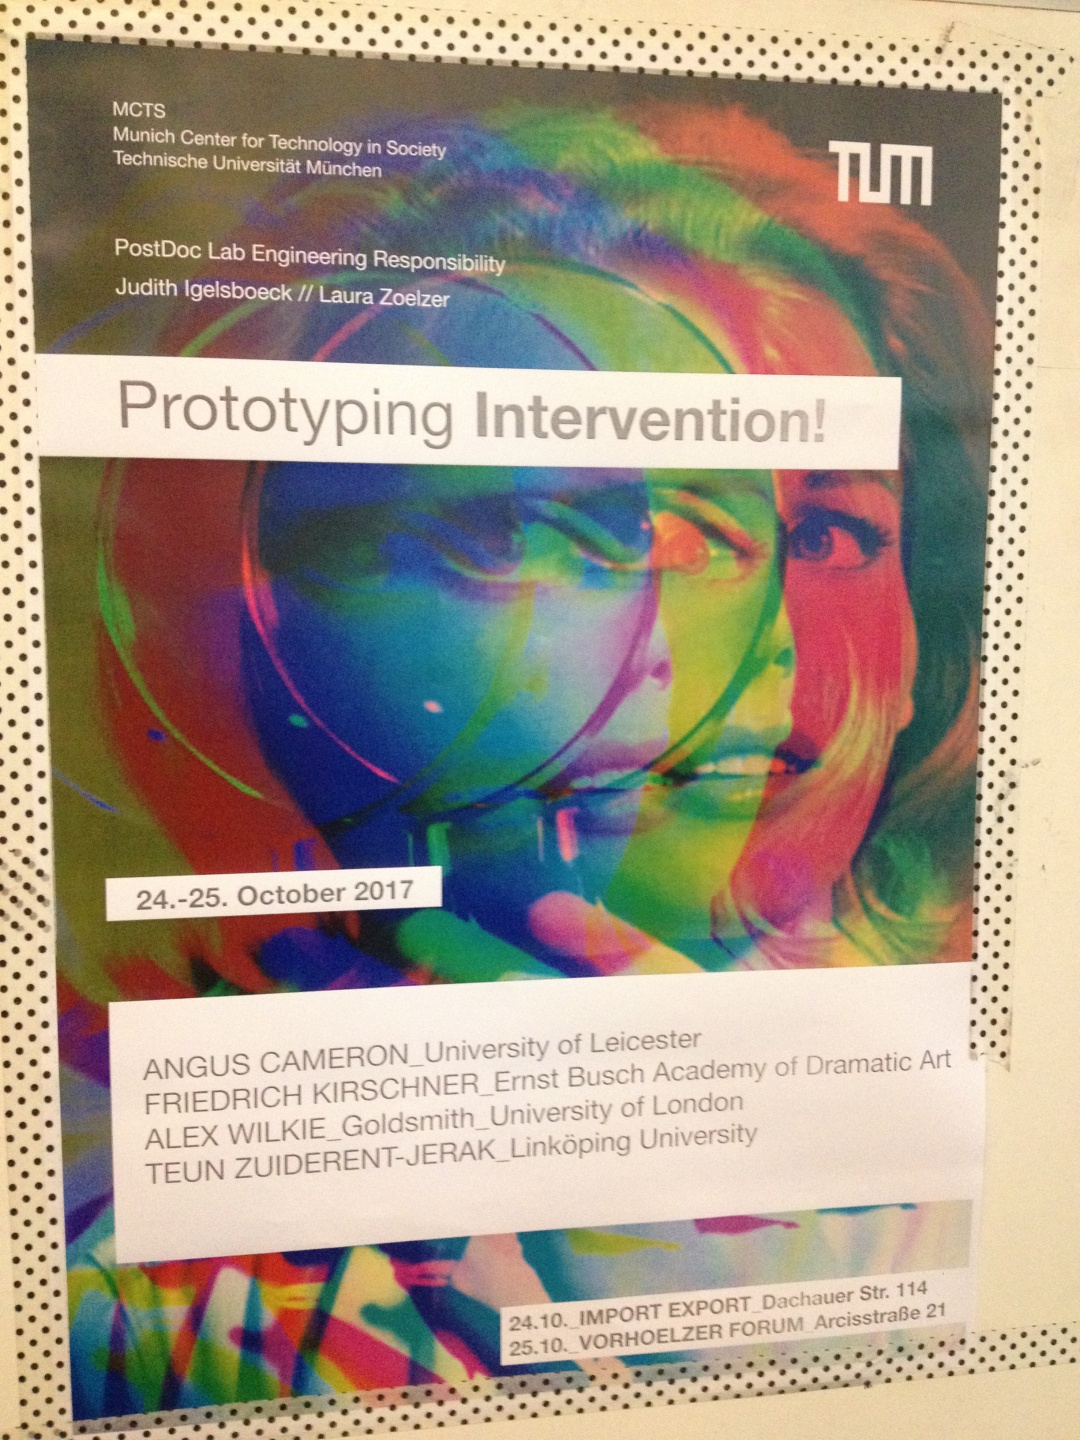 Presenting ENERGISE at the Prototyping Intervention! workshop, 24-25 October 2017